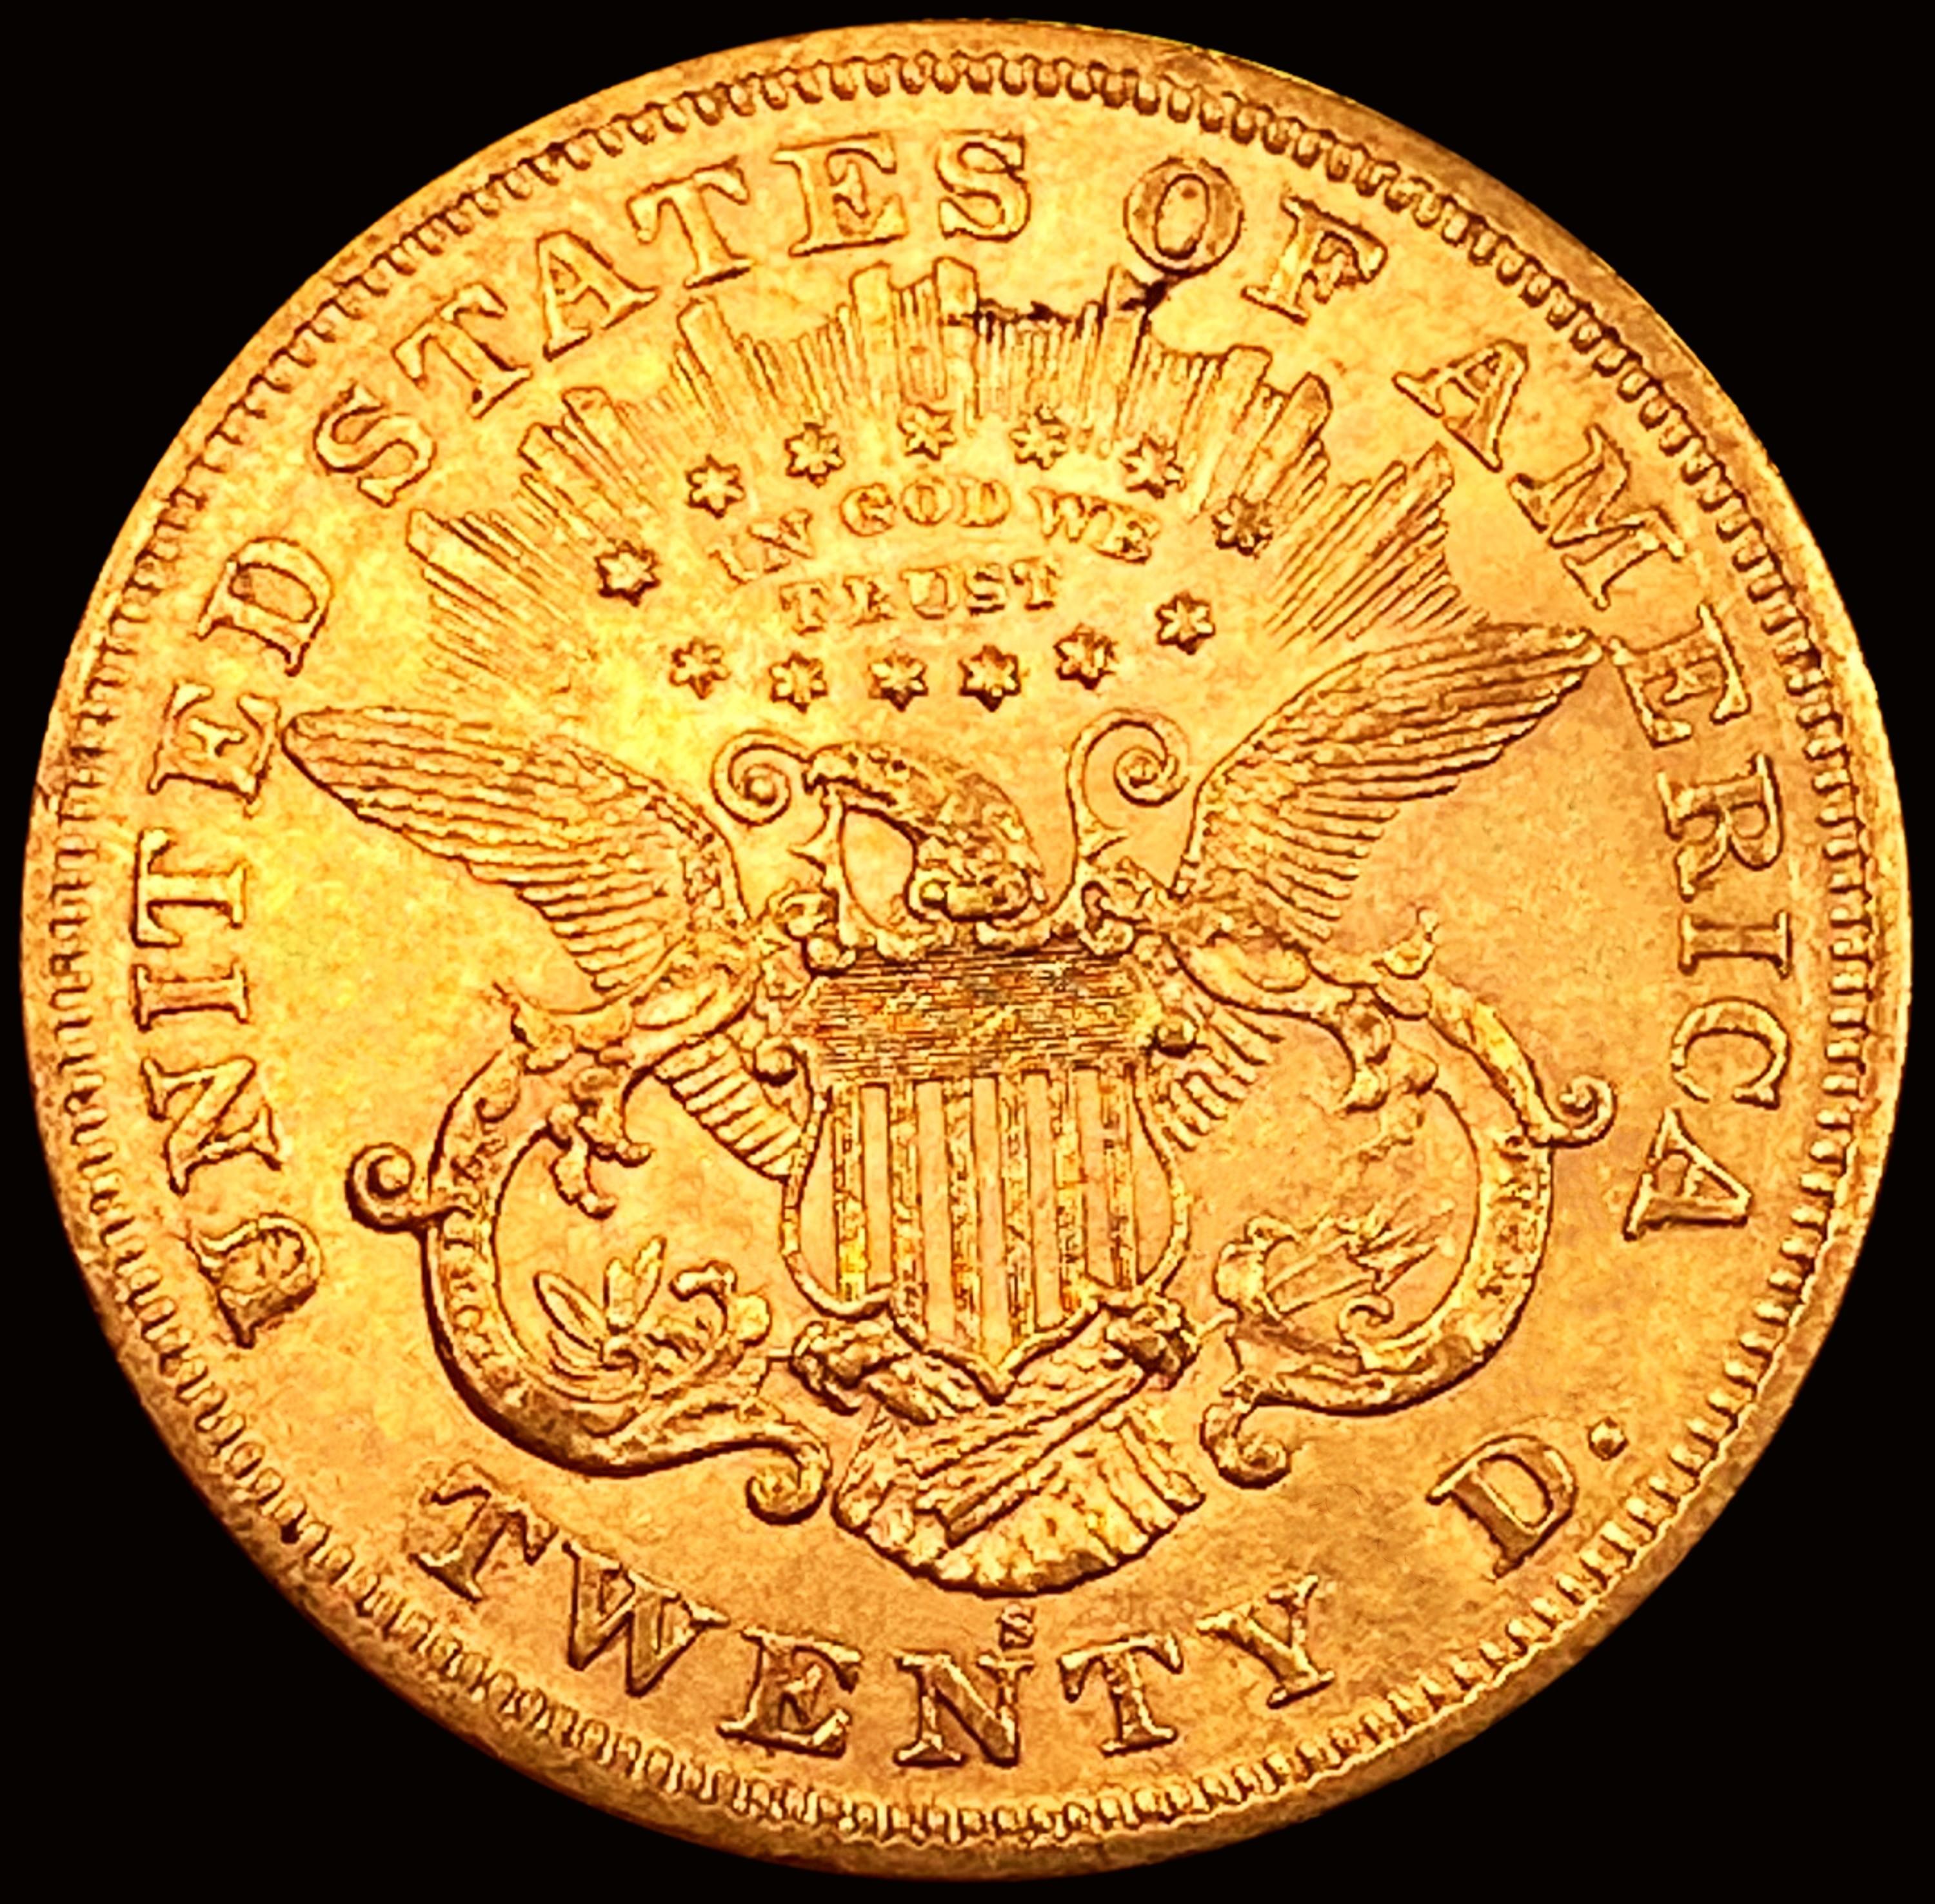 1876-S $20 Gold Double Eagle UNCIRCULATED